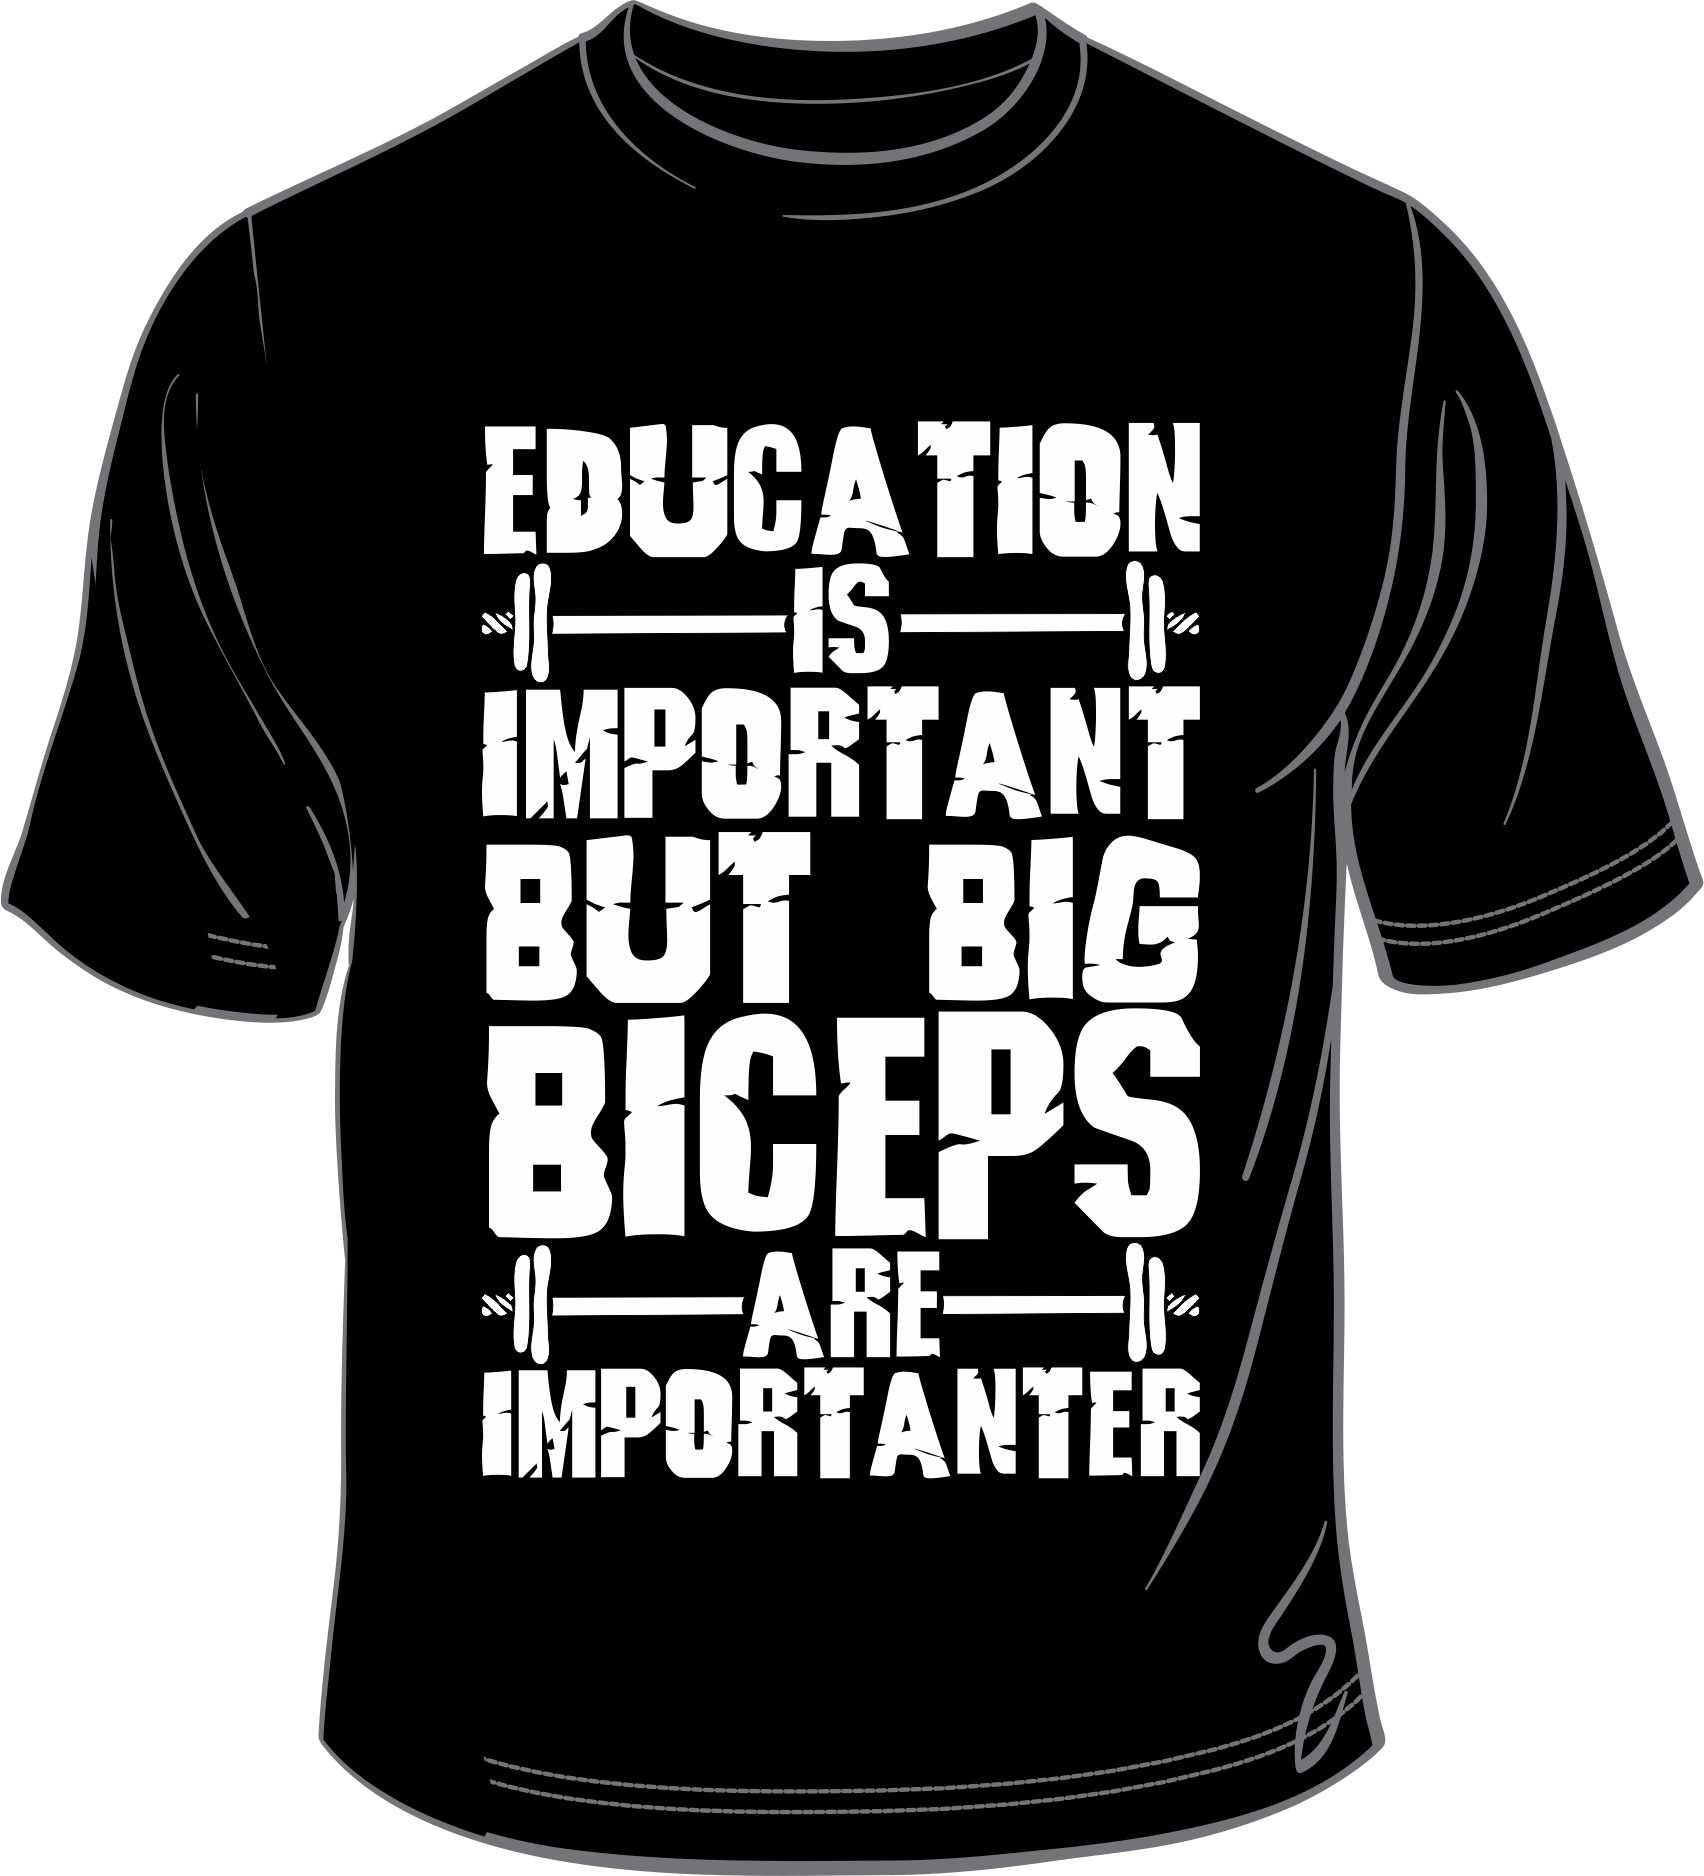 Education is important but Big Biceps are IMPORTANTER - Printed